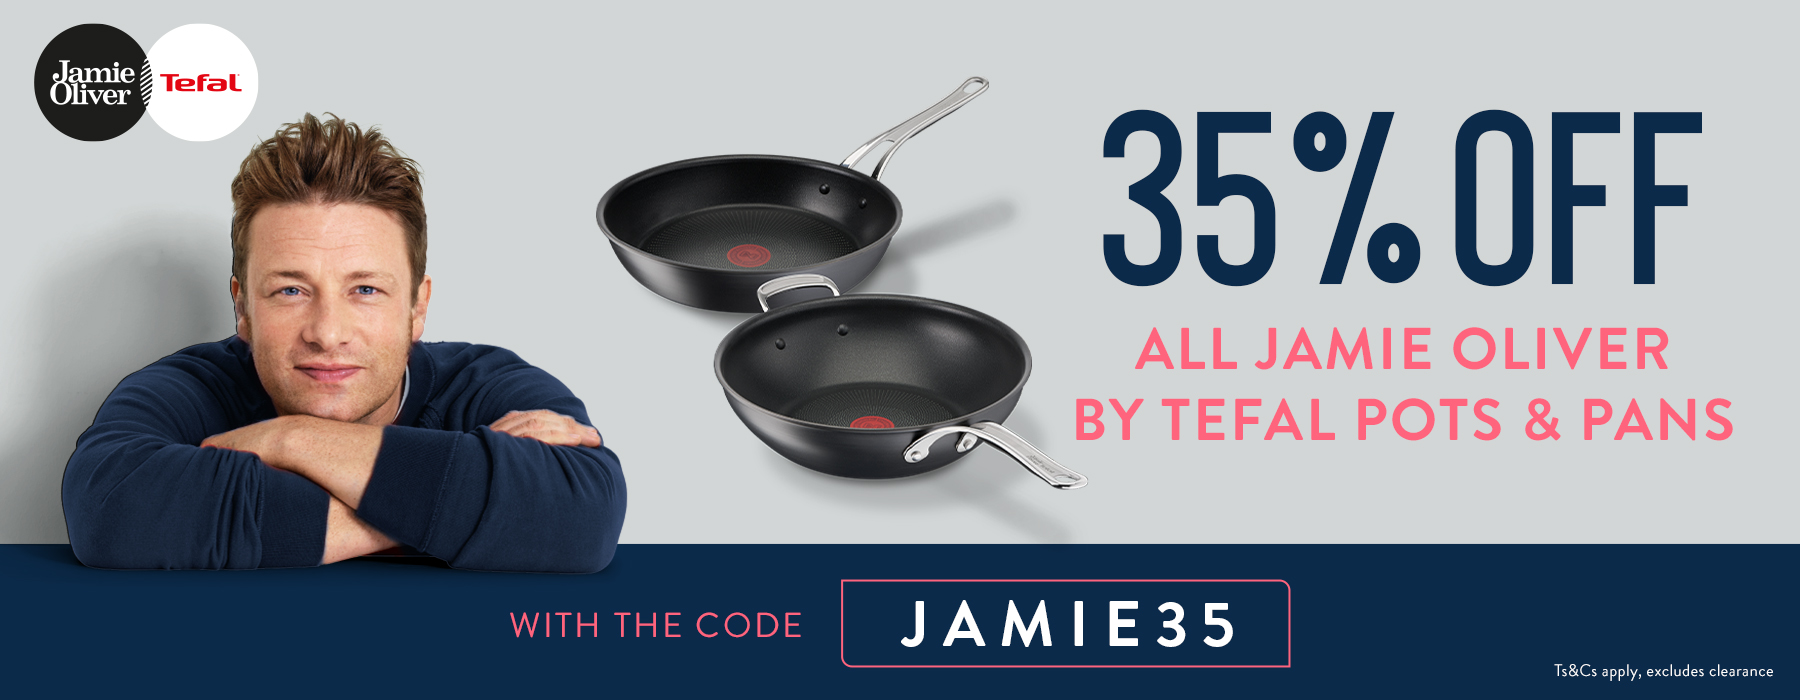 cate-promo-banner-Jamie Oliver Saute Pans